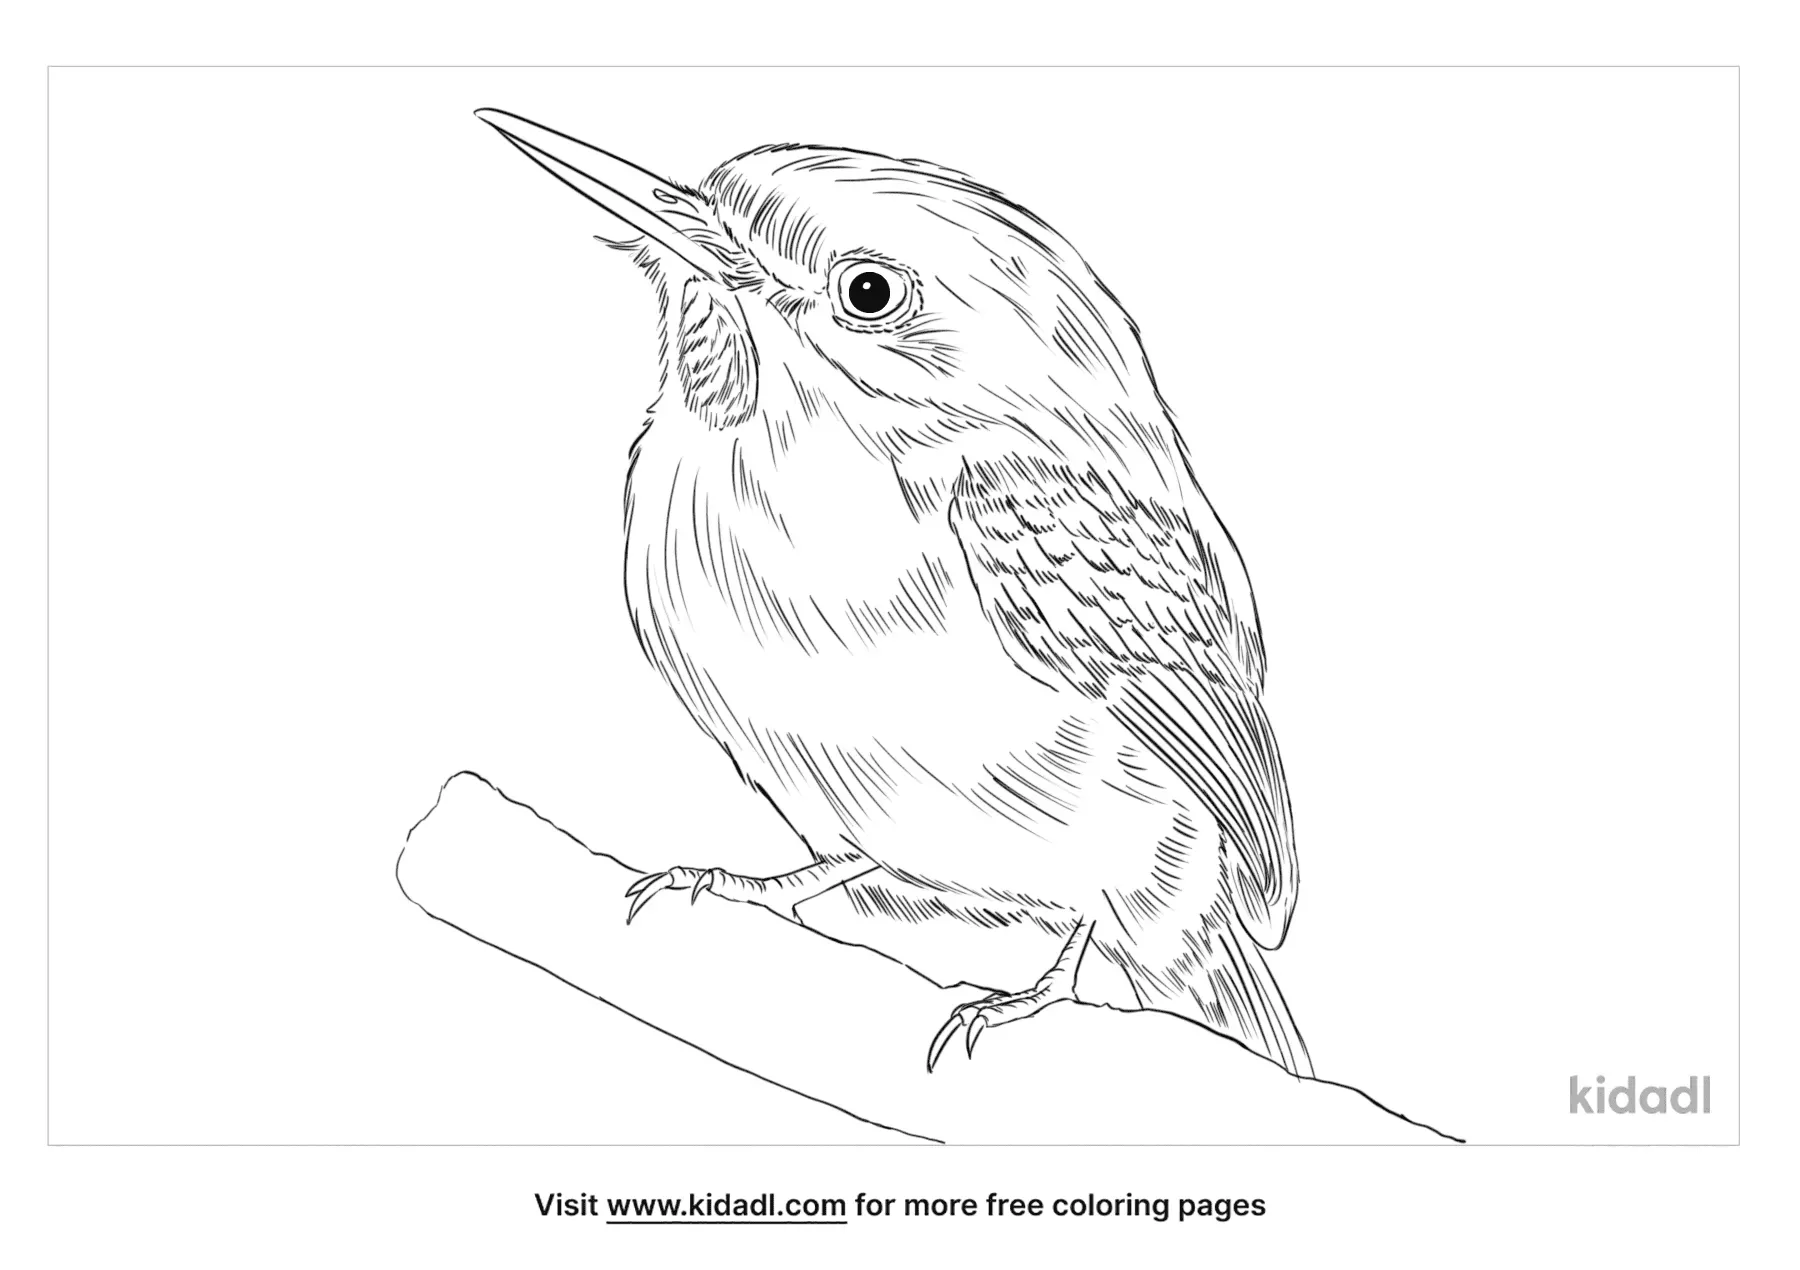 Franklin Gull Coloring Page | Free Birds Coloring Page | Kidadl